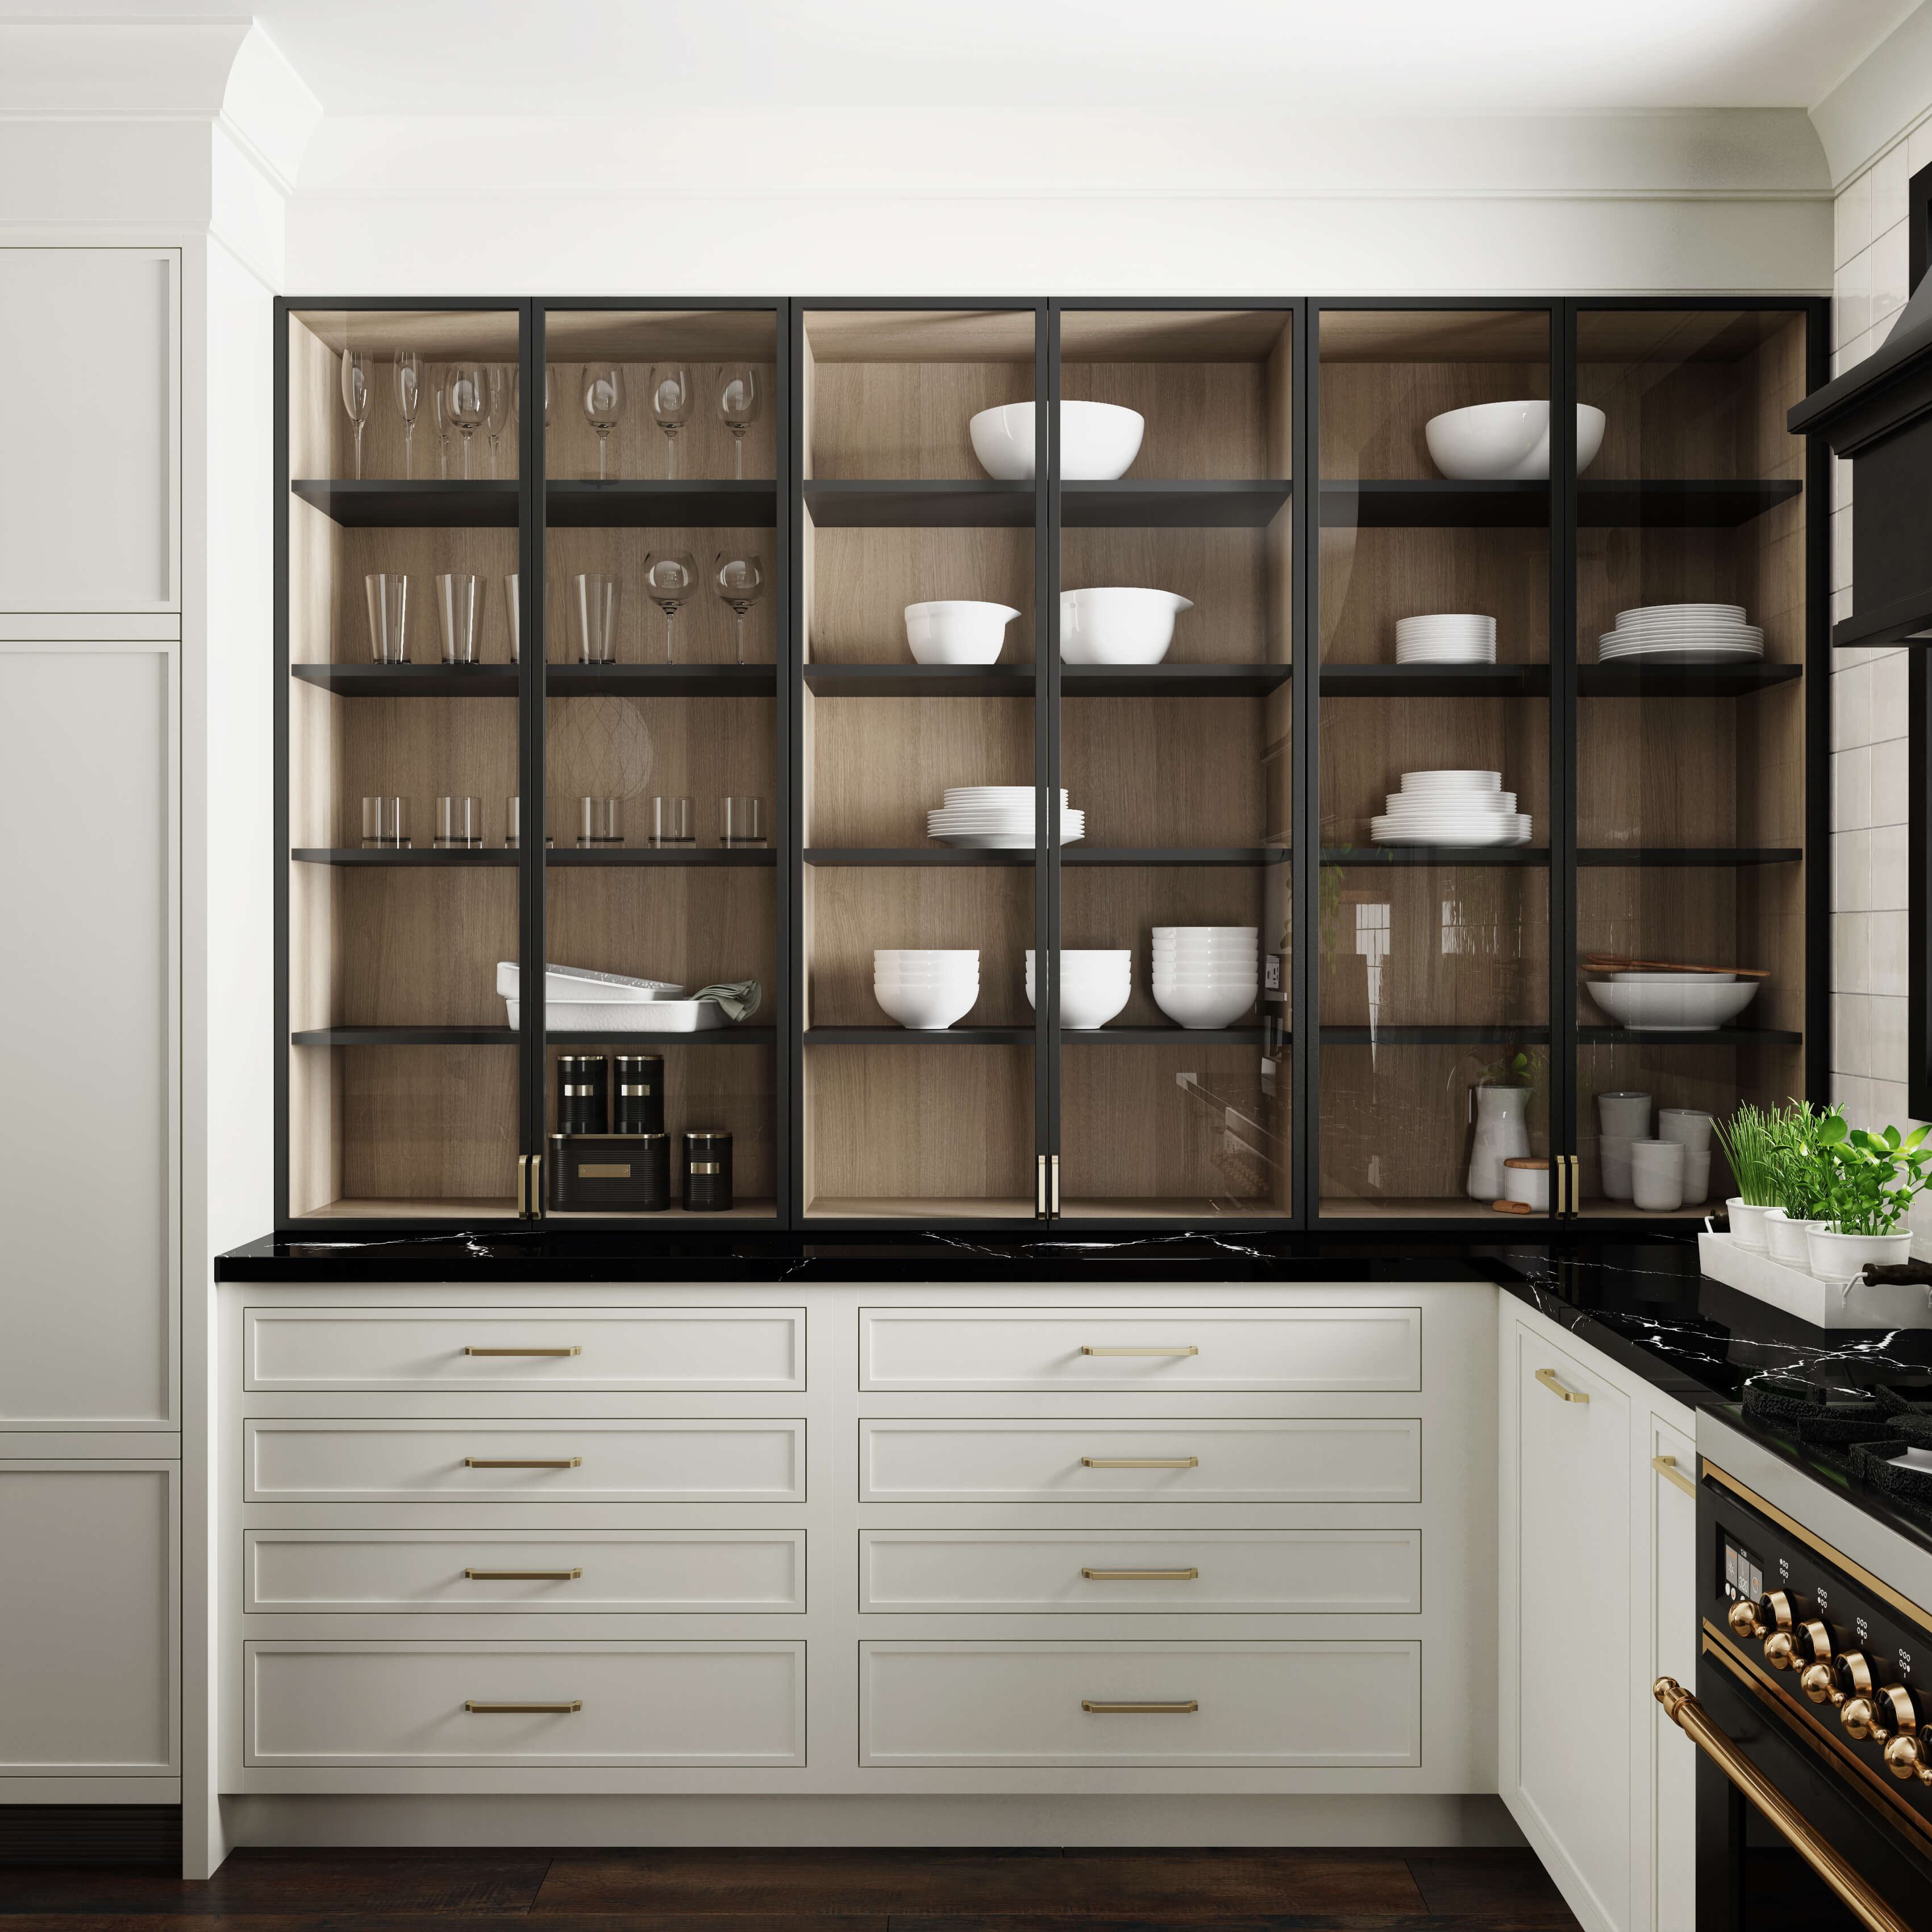 White painted inset cabinets contrasted by black framed metal cabinet doors with glass inserts.